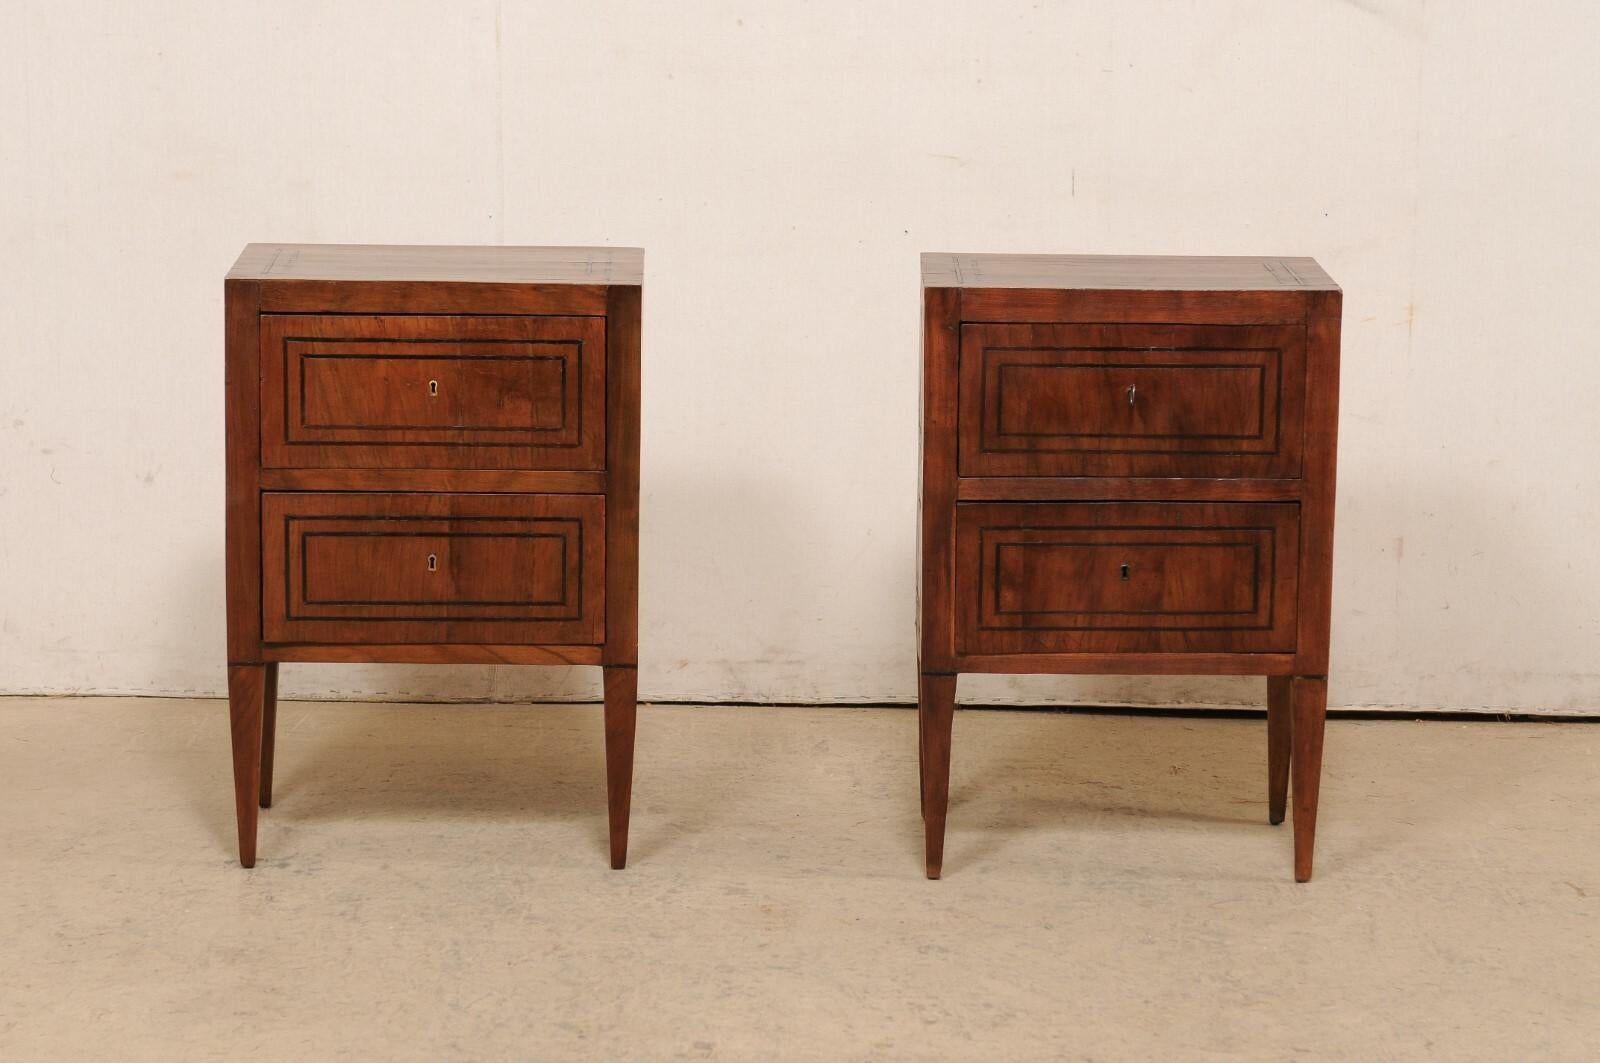 Italian Pair of Two-Drawer Side Chests w/Nice Inlay Banding, Early 19th C. In Good Condition For Sale In Atlanta, GA